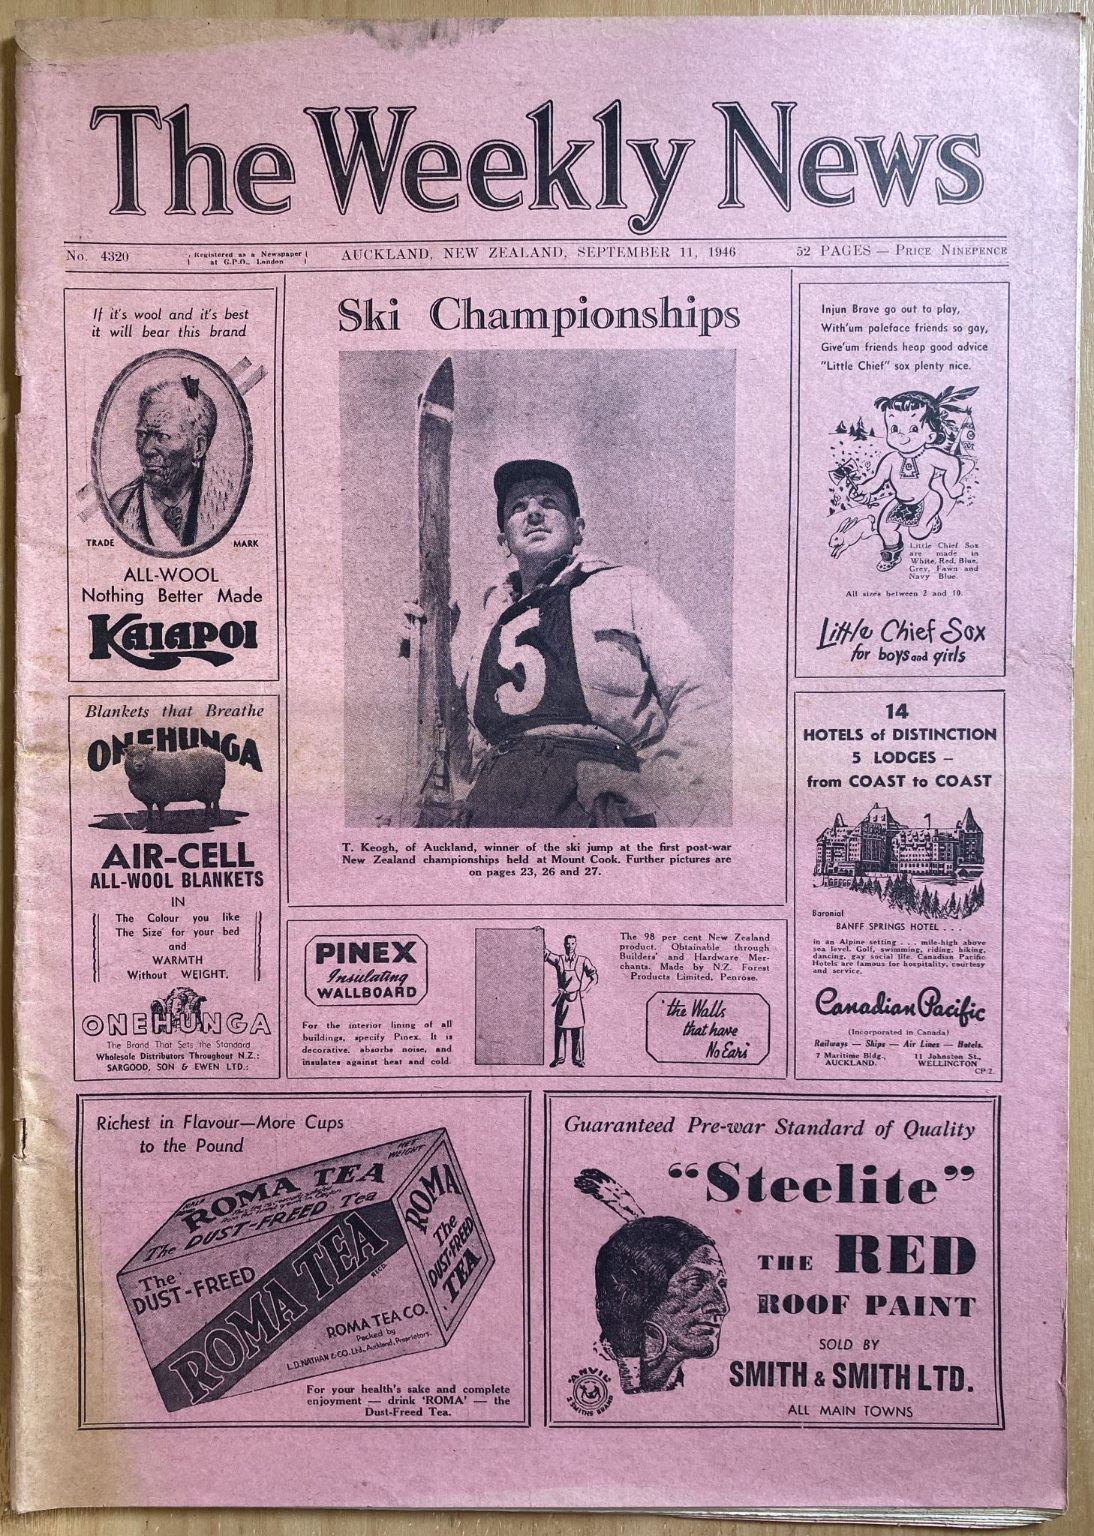 OLD NEWSPAPER: The Weekly News - No. 4320, 11 September 1946